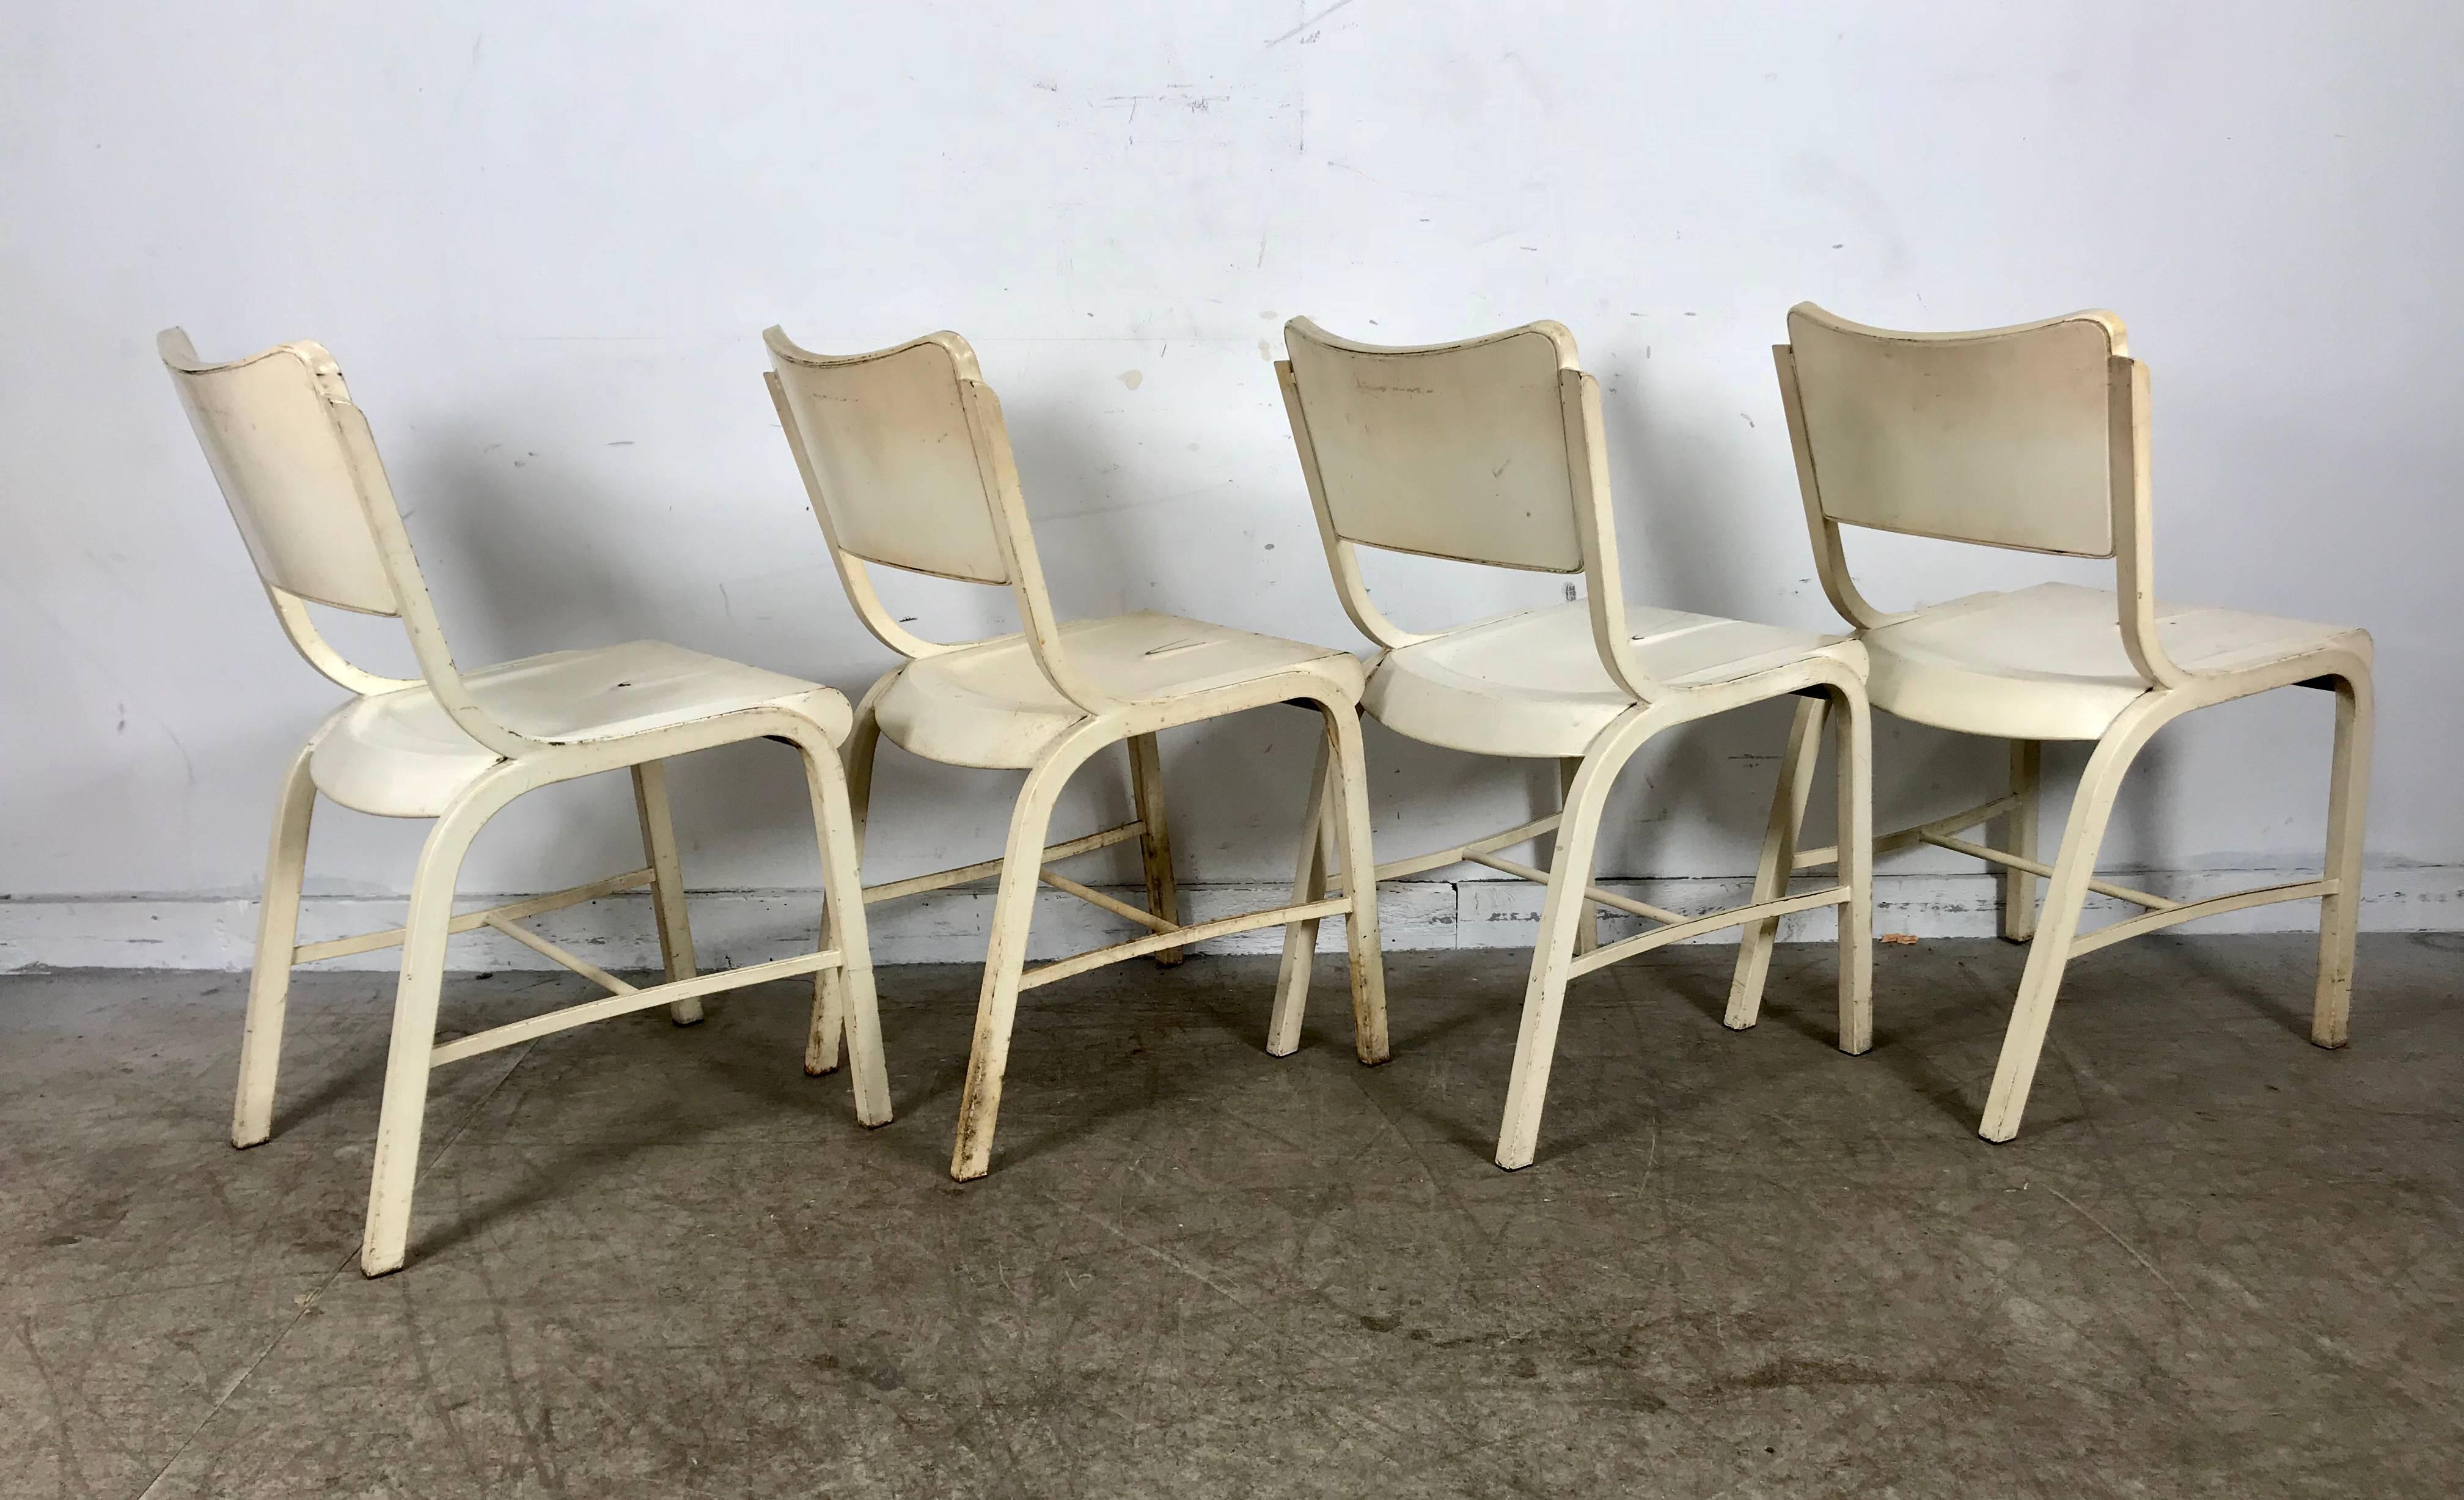 American Set of Four Metal Industrial Side Chairs Manufactured by Doehler Metal Furn Co